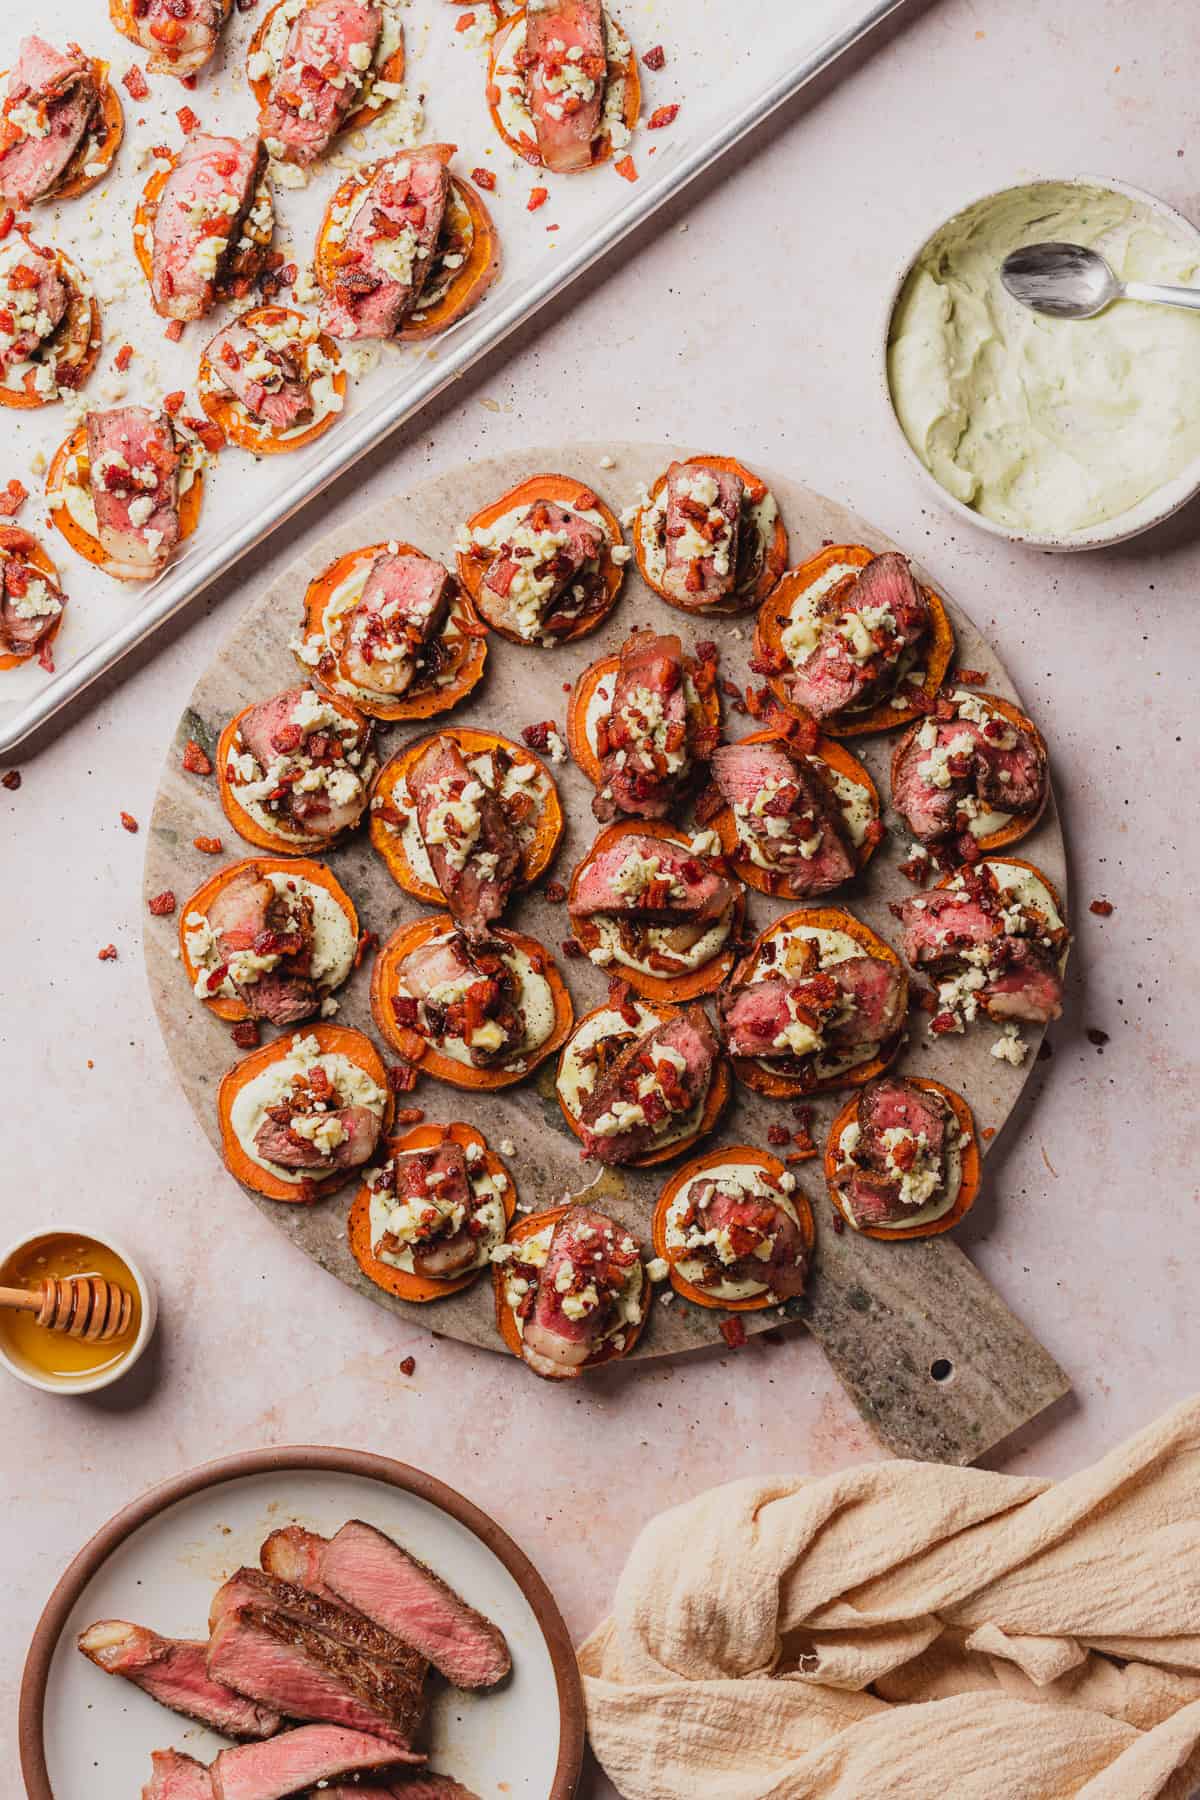 tray full of steak appetizers on sweet potato rounds with blue cheese, bacon and caramelized onions